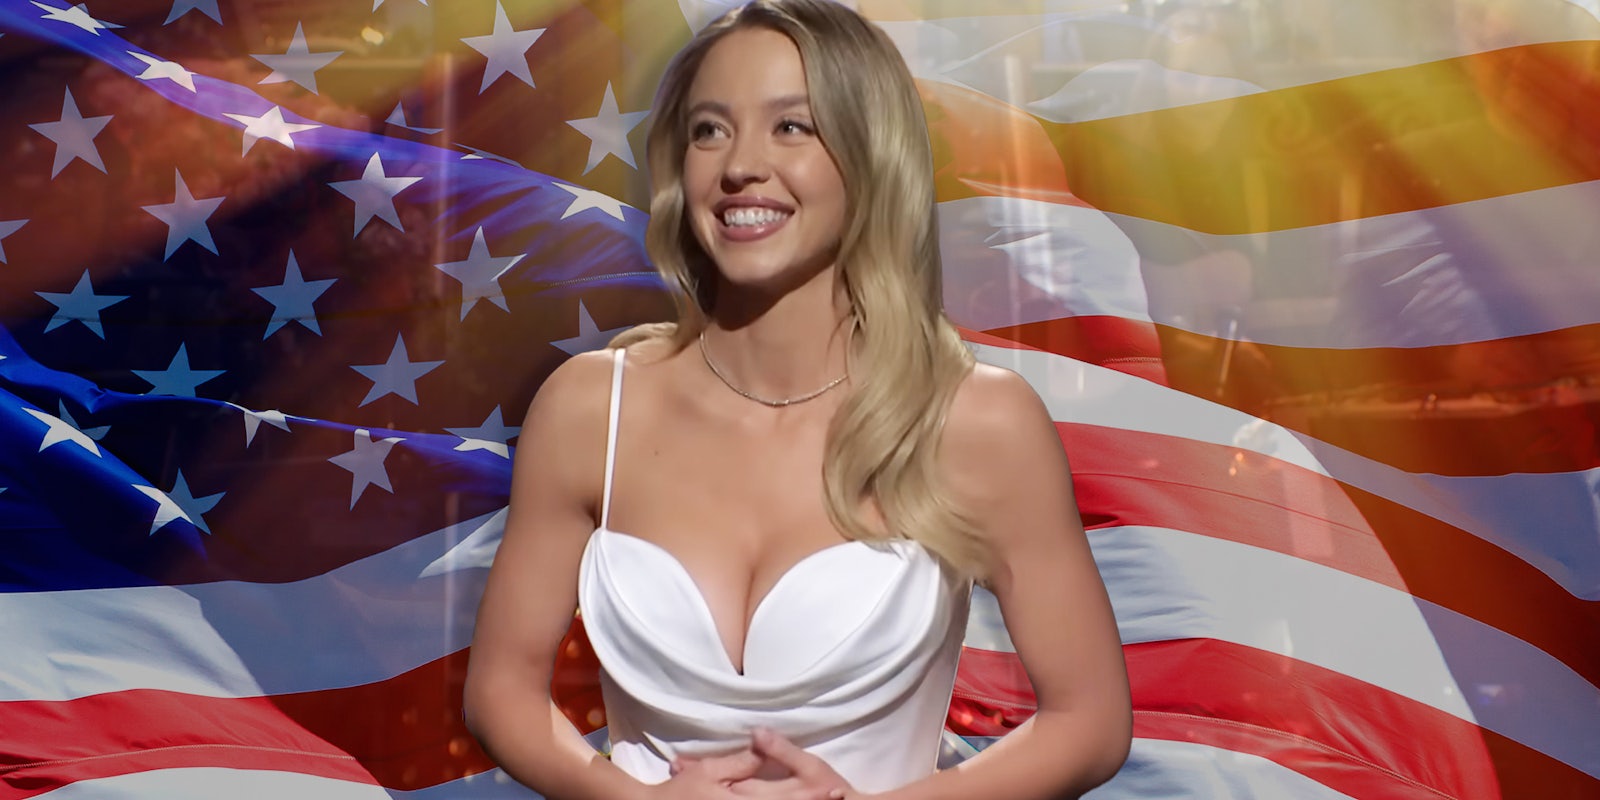 Sydney Sweeney's SNL outfit somehow defeated wokeness, right-wingers boast